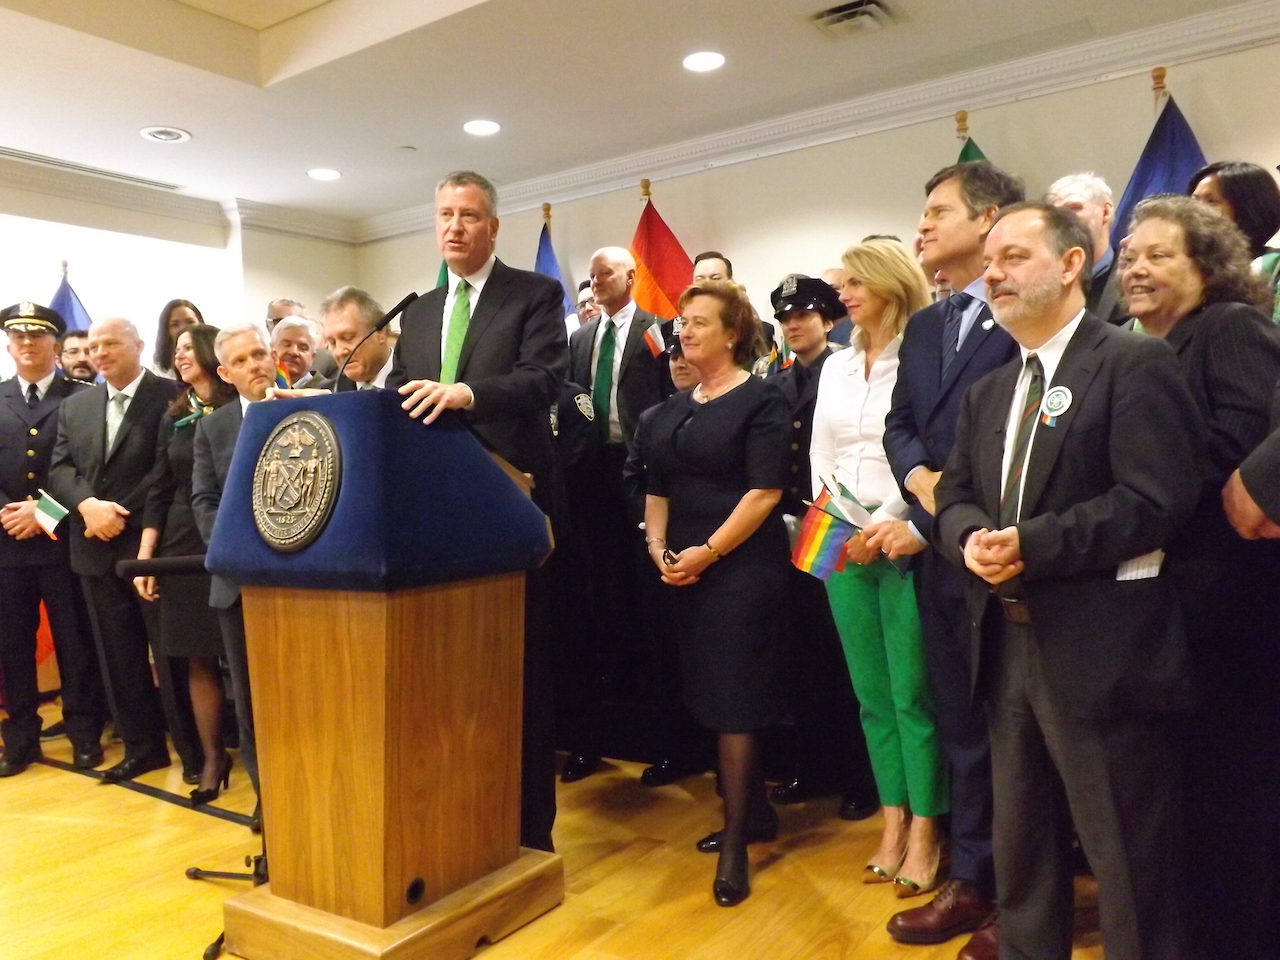 Announcing the news at the Irish Consulate on Park Ave., Mayor Bill de Blasio was joined by Barbara Jones, the Irish consul general to New York, to the right of the mayor, and activist Brendan Fay, far right.   Photo by Duncan Osborne